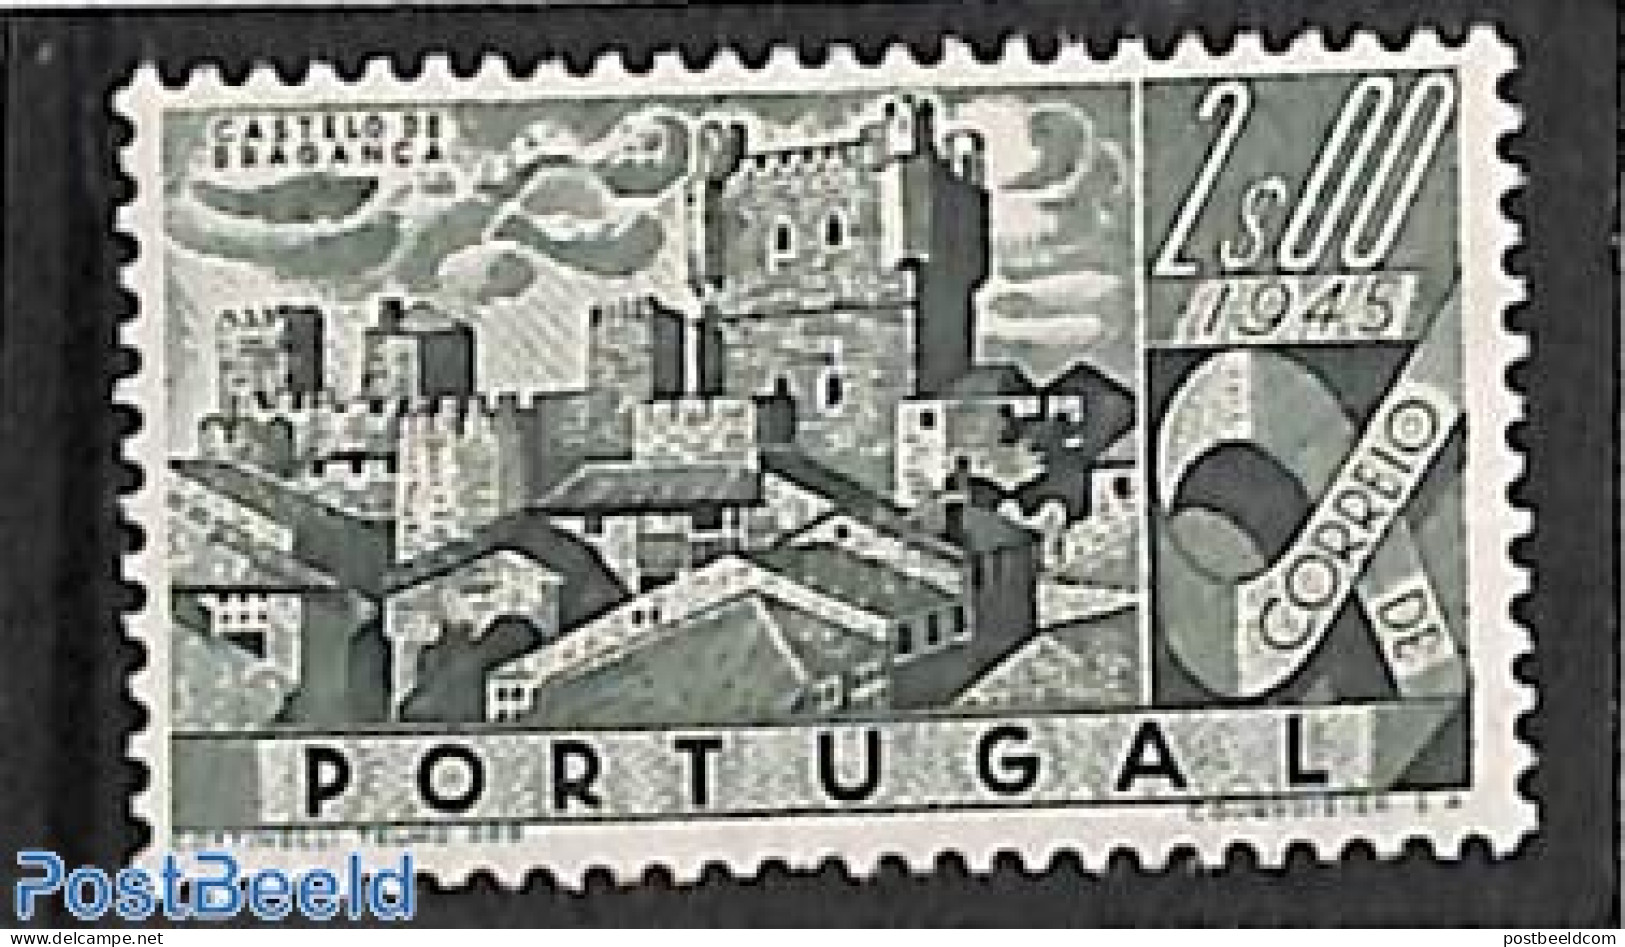 Portugal 1946 2.00E, Stamp Out Of Set, Unused (hinged) - Neufs